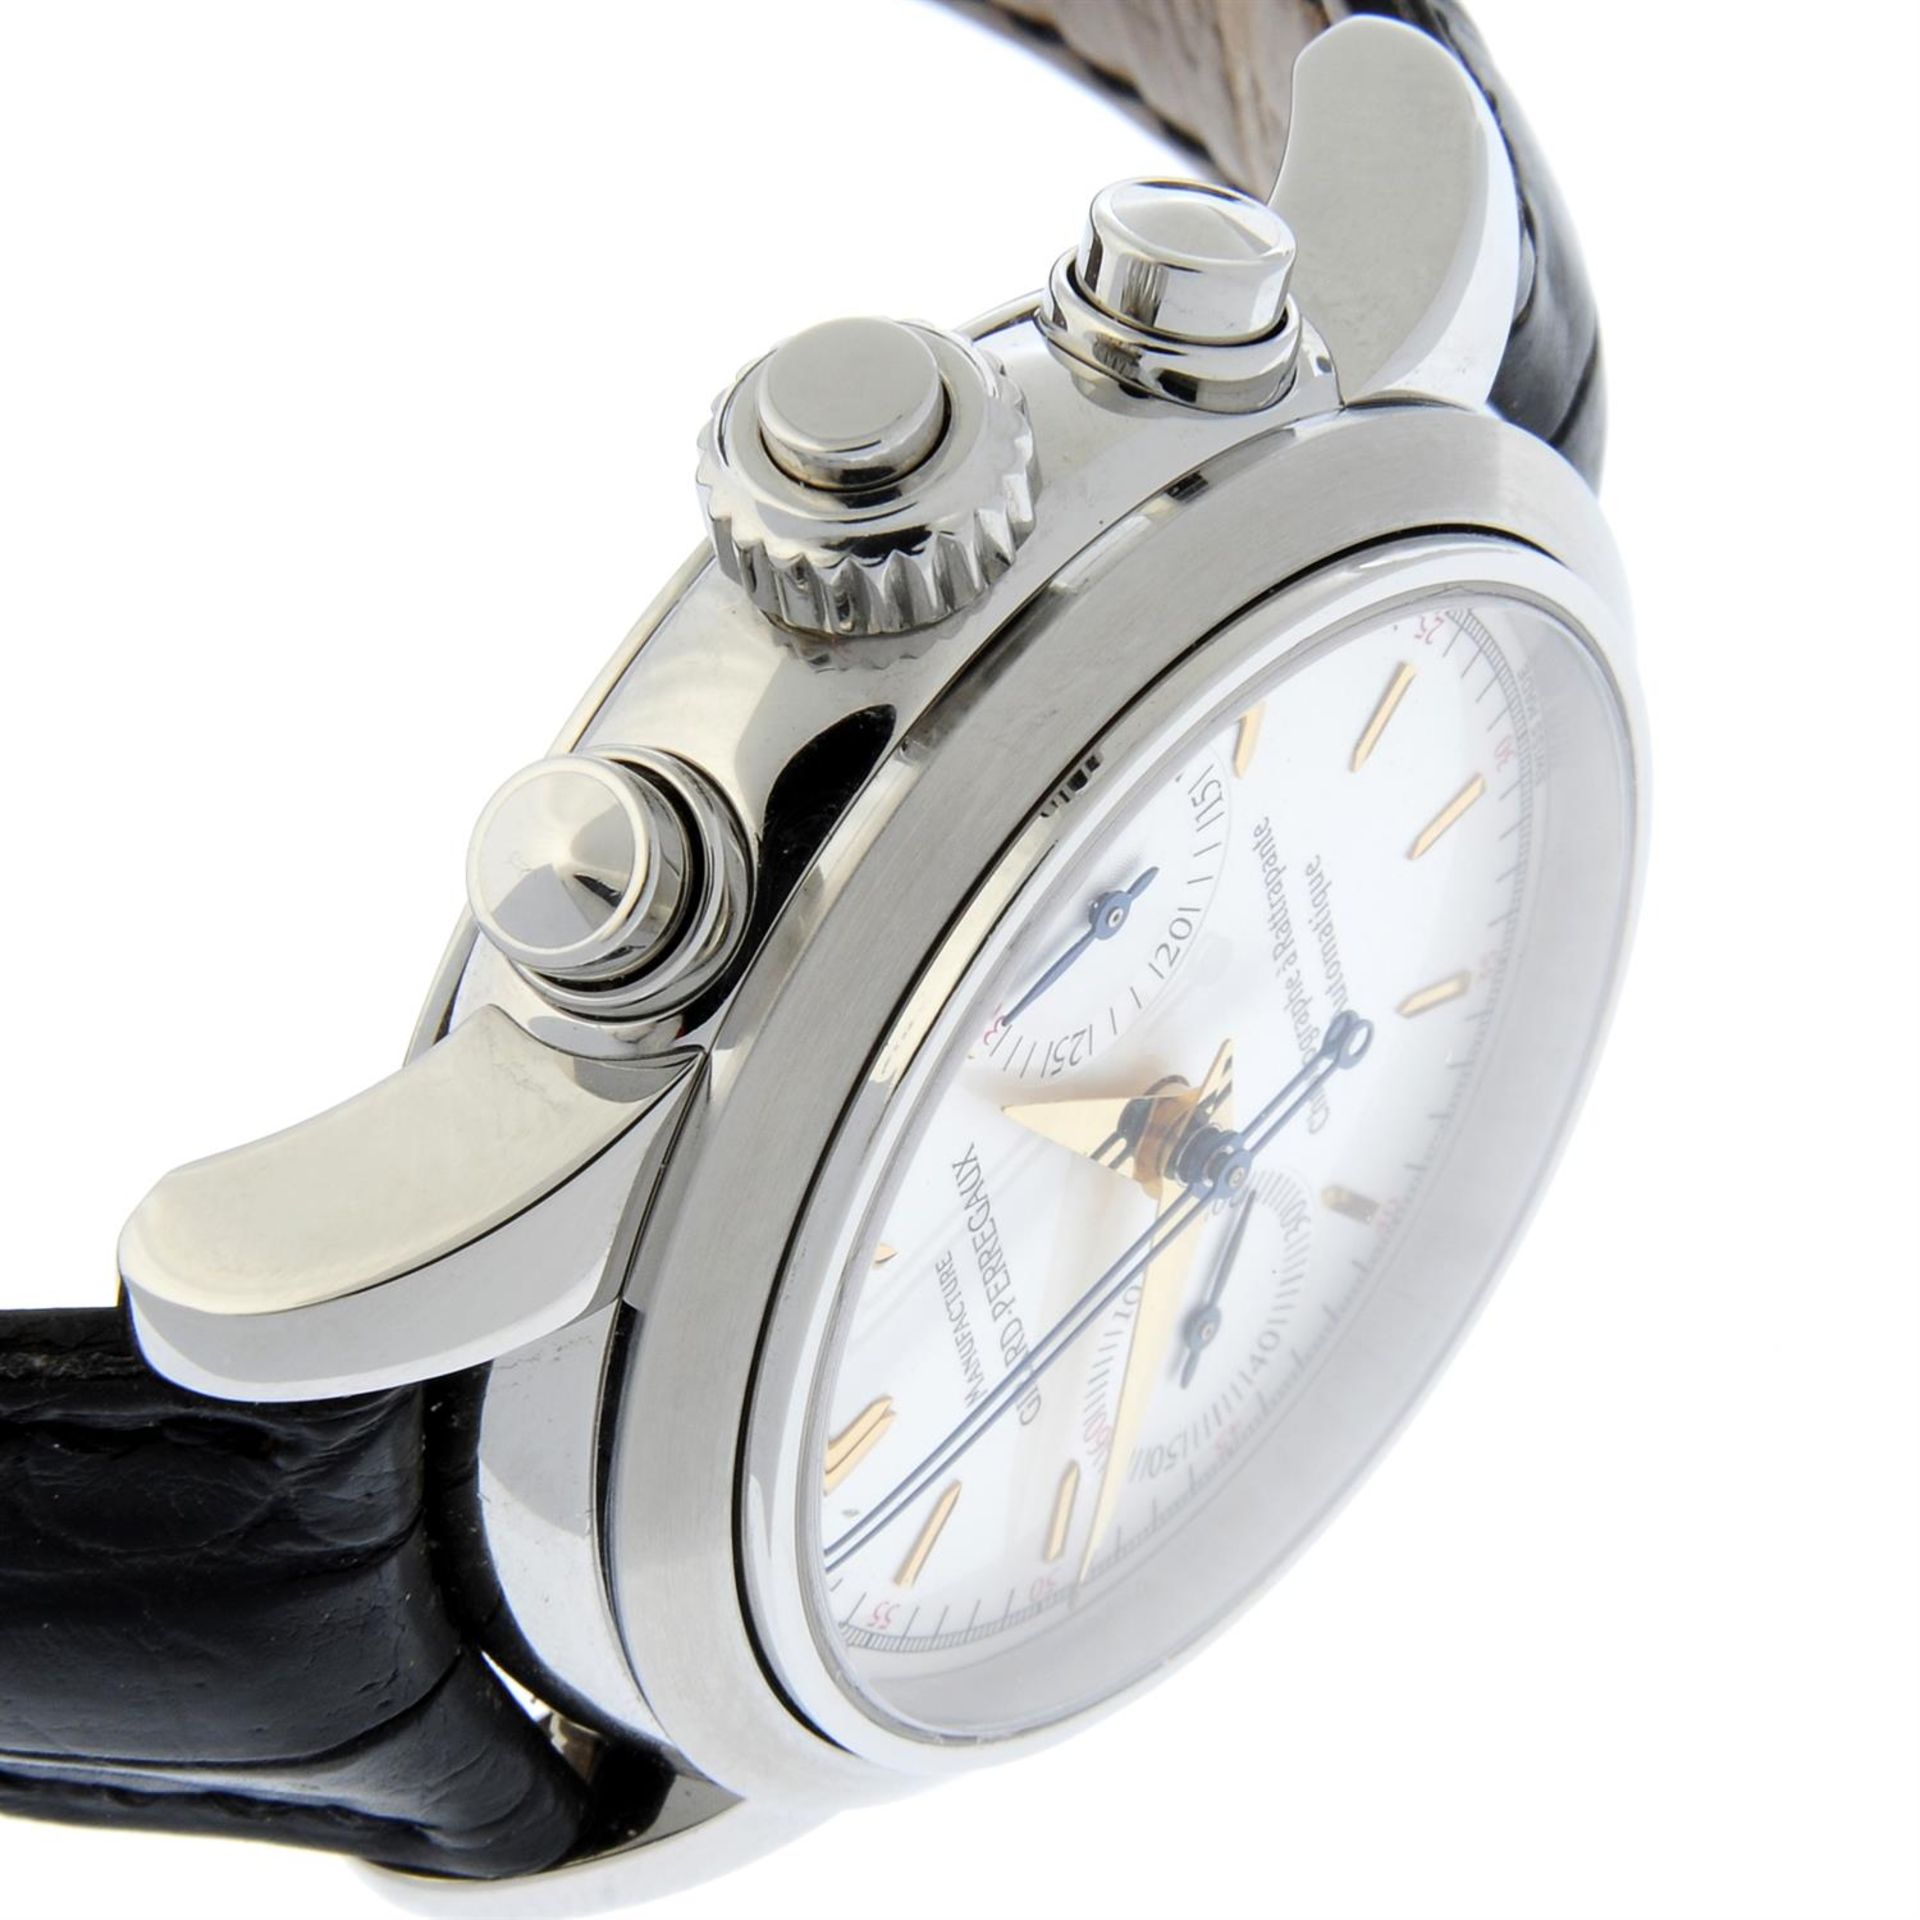 GIRARD-PERREGAUX - a stainless steel Rattrapante chronograph wrist watch, 38mm. - Image 3 of 6